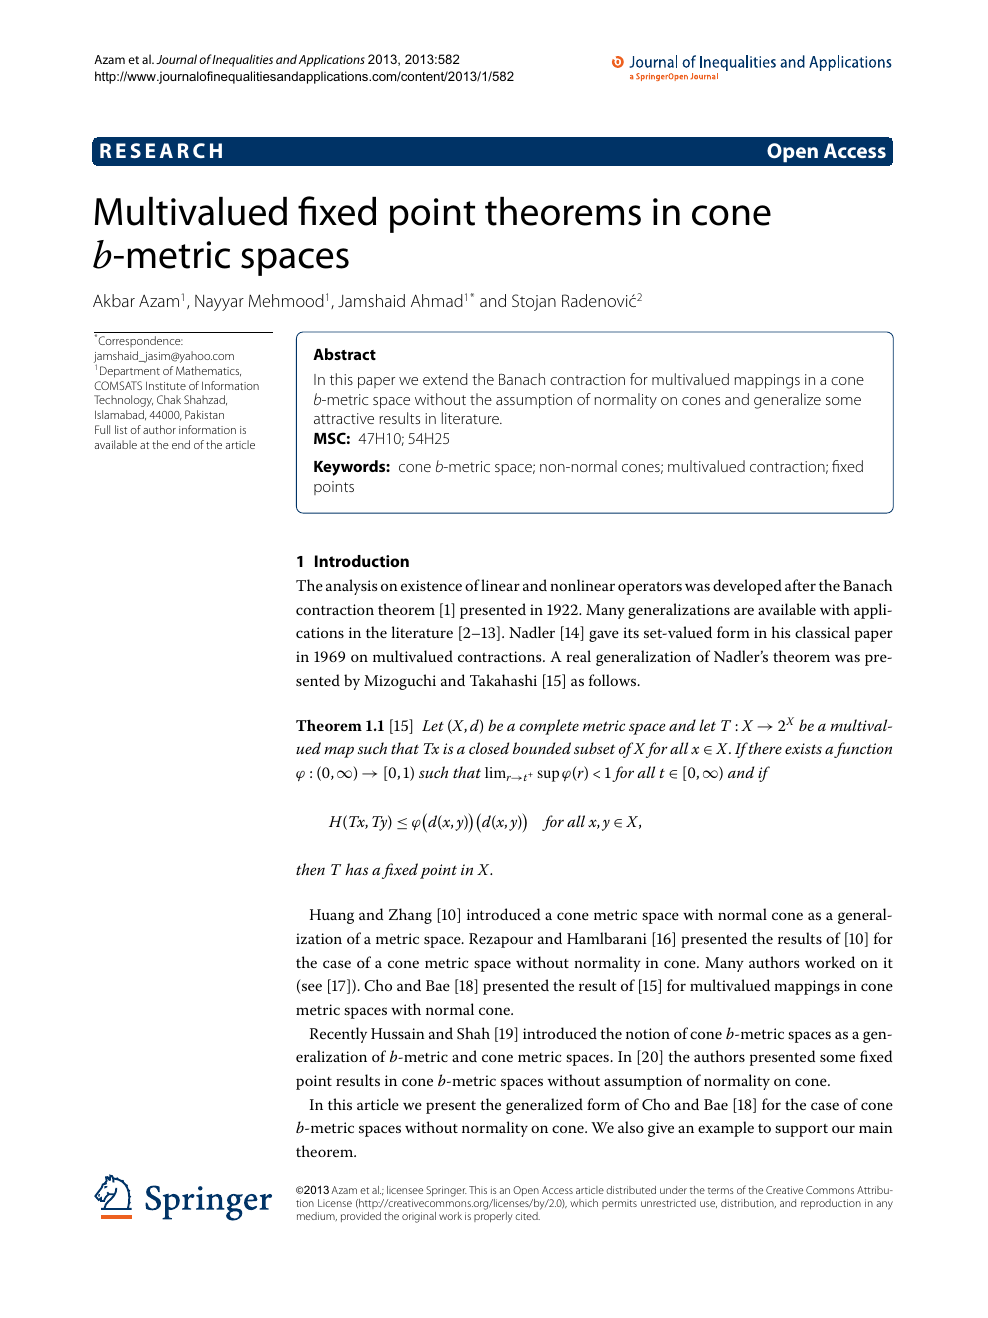 Multivalued Fixed Point Theorems In Cone B Metric Spaces Topic Of Research Paper In Mathematics Download Scholarly Article Pdf And Read For Free On Cyberleninka Open Science Hub